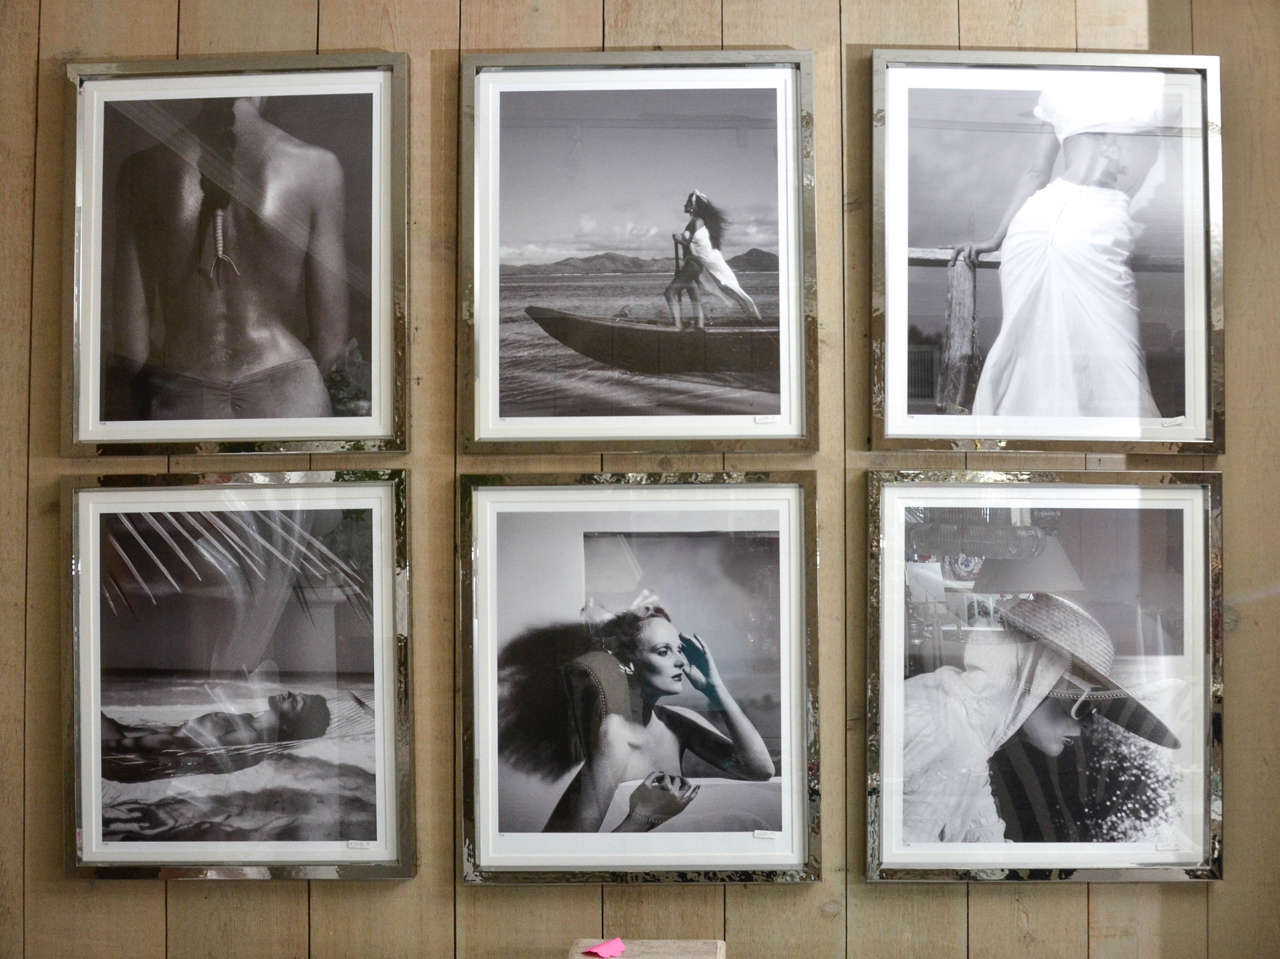 Six fashion photographs by Willie Christie taken during the 1970s and 1980s mostly for Vogue. They are attractively framed in silvered metal frames and can be purchased individually for $1200 each.